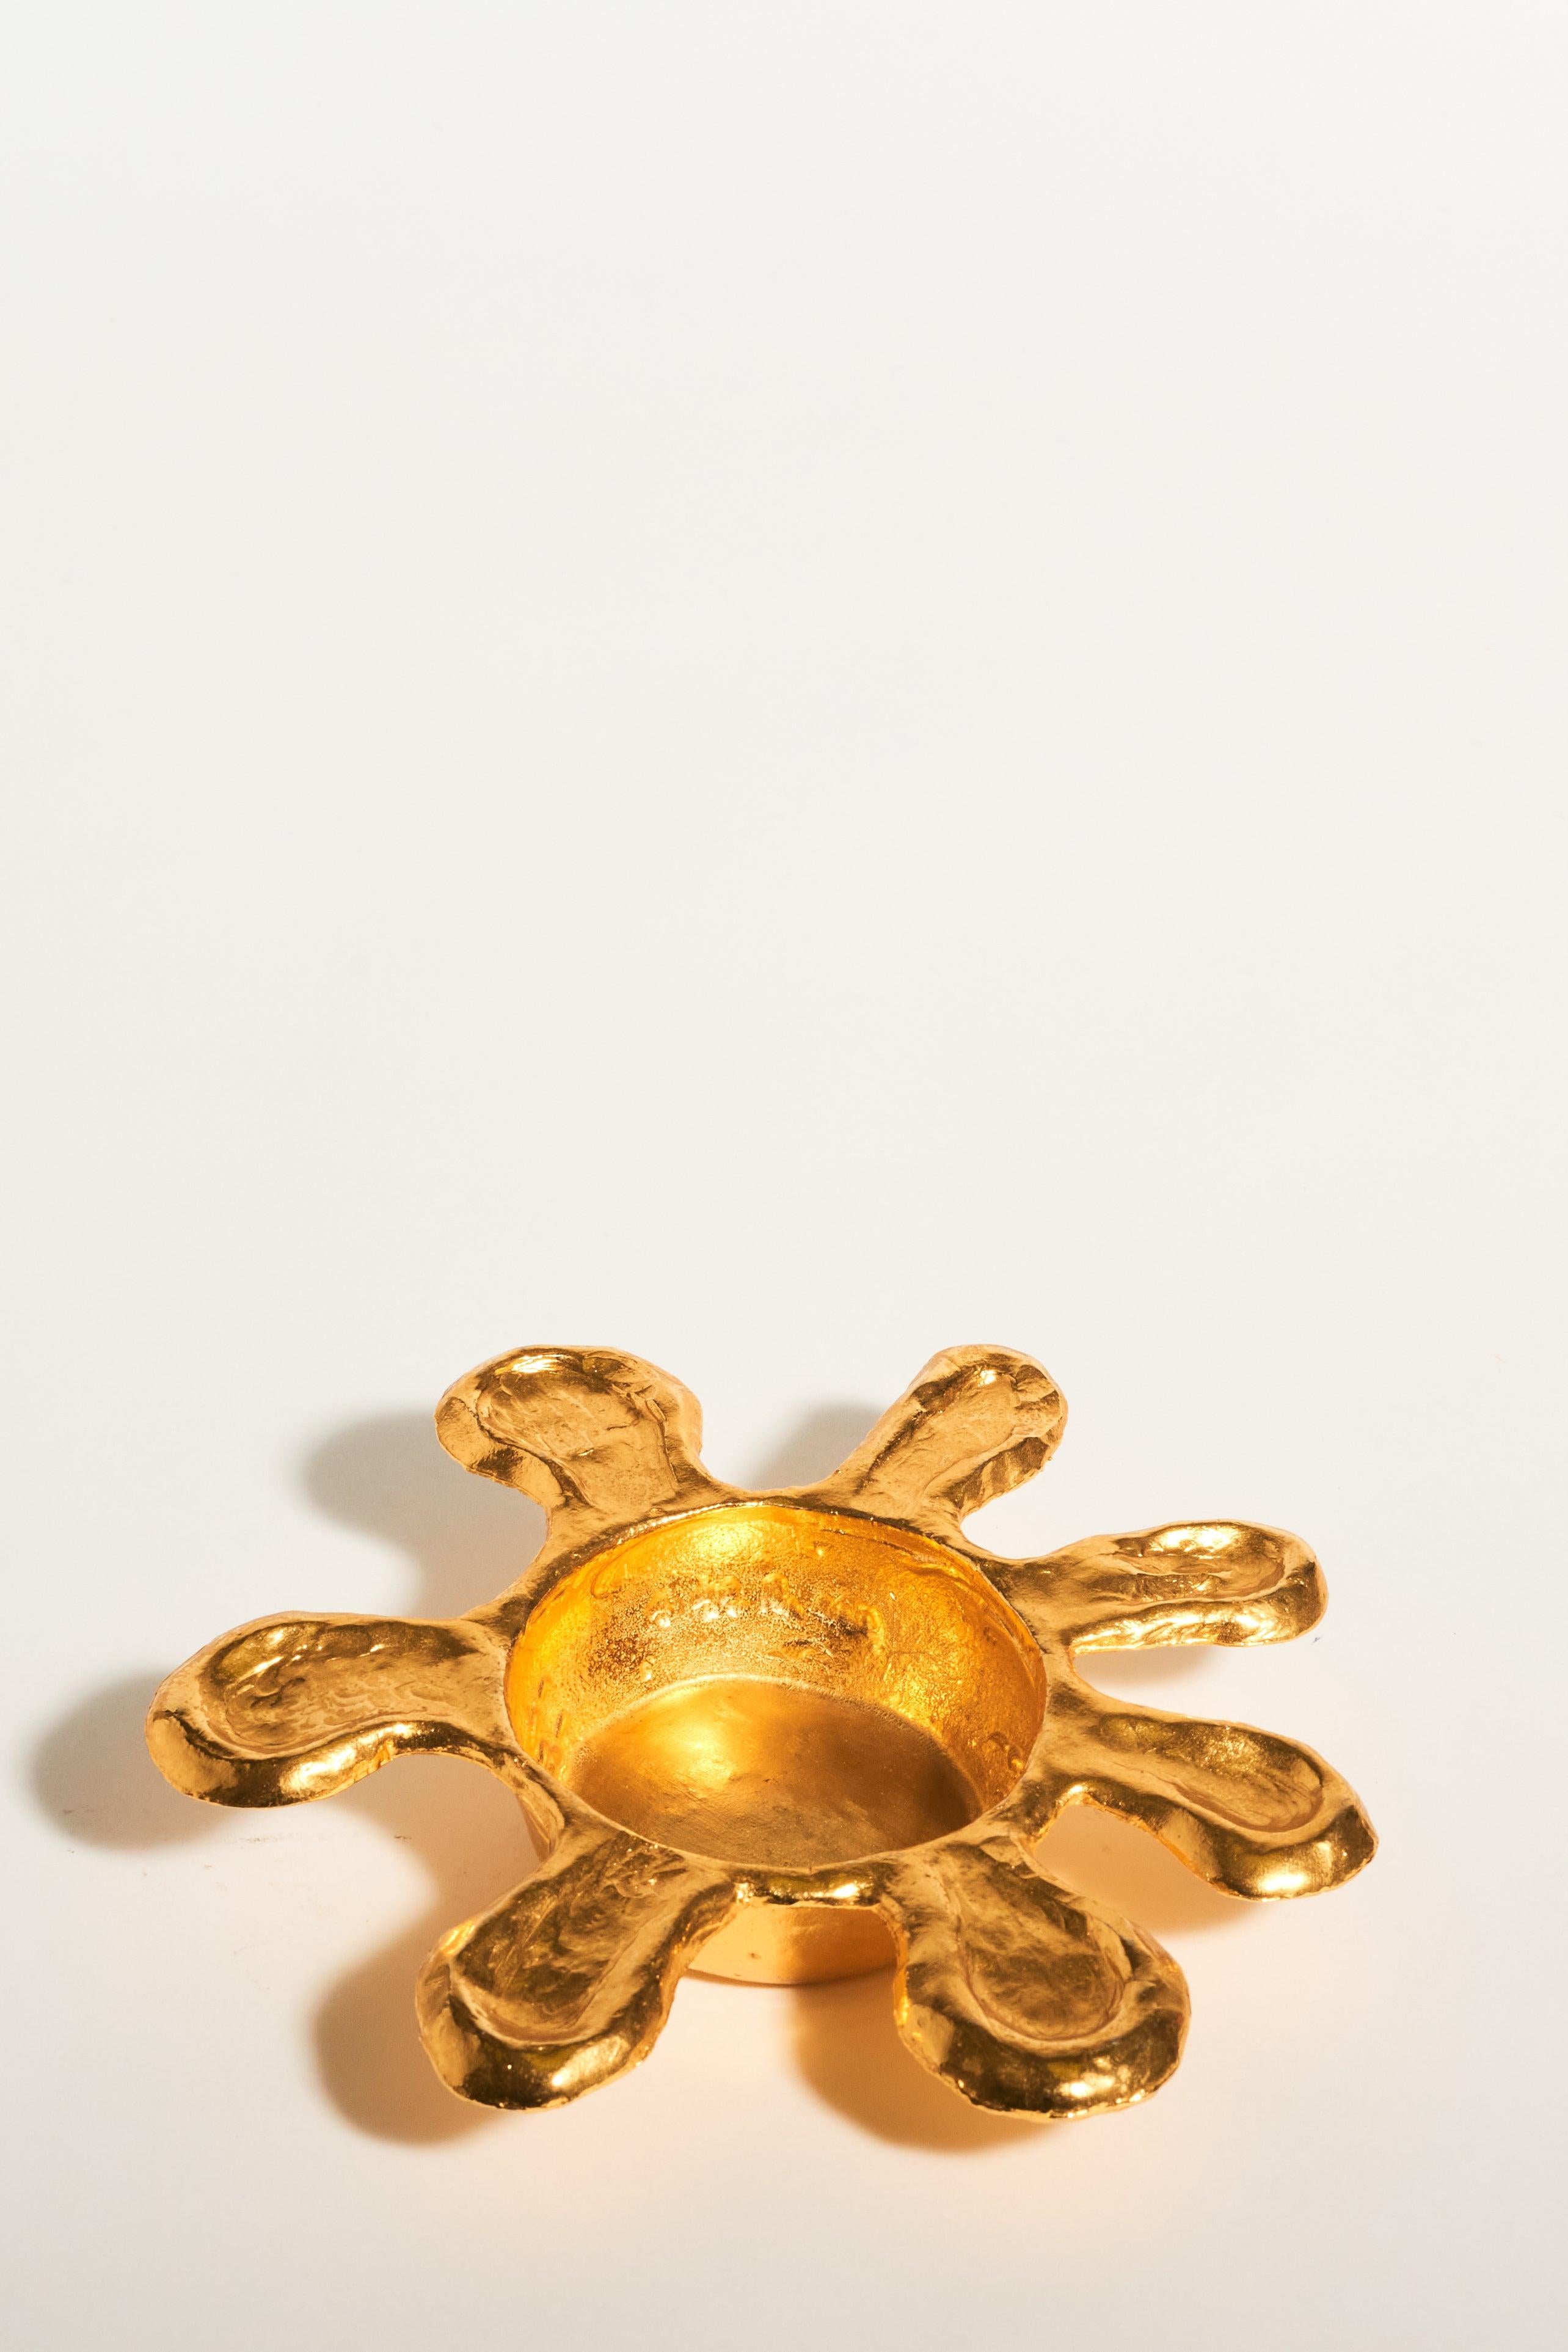 French jewelry designer brass catchall, slightly rustic flower shape with tactile appeal, signed on base.